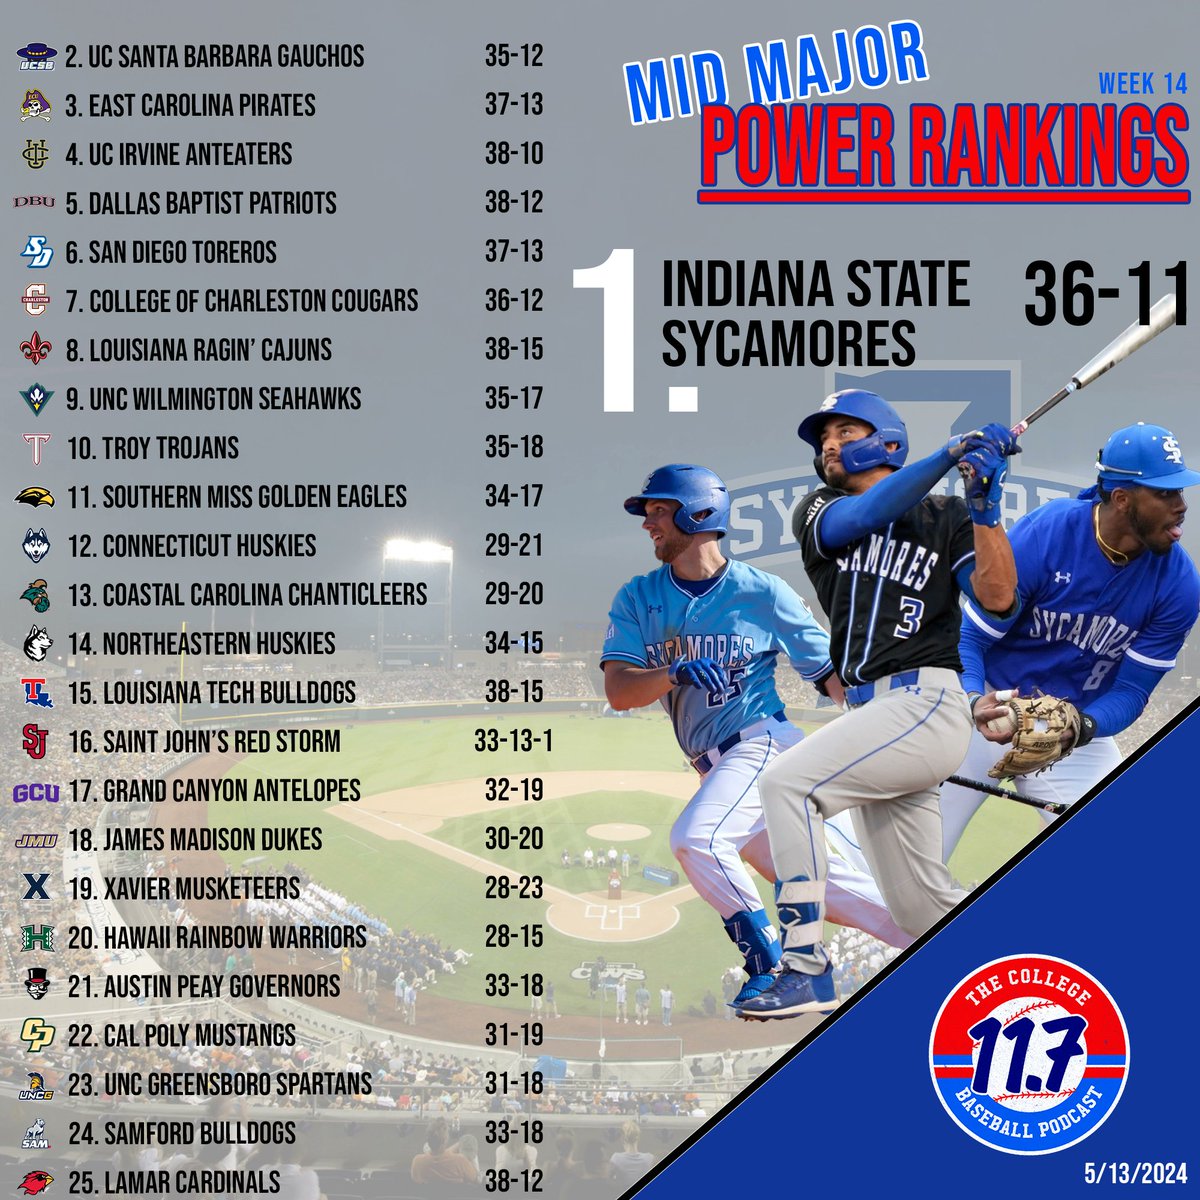 🚨 MID MAJOR POWER RANKINGS 🚨 ➡️ @IndStBaseball takes over #1 for first time ever ➡️ @BigWestSports with 2 in Top 5 ➡️ @SunBelt with 4 in Top 15 ➡️ @UNCGBaseball enters